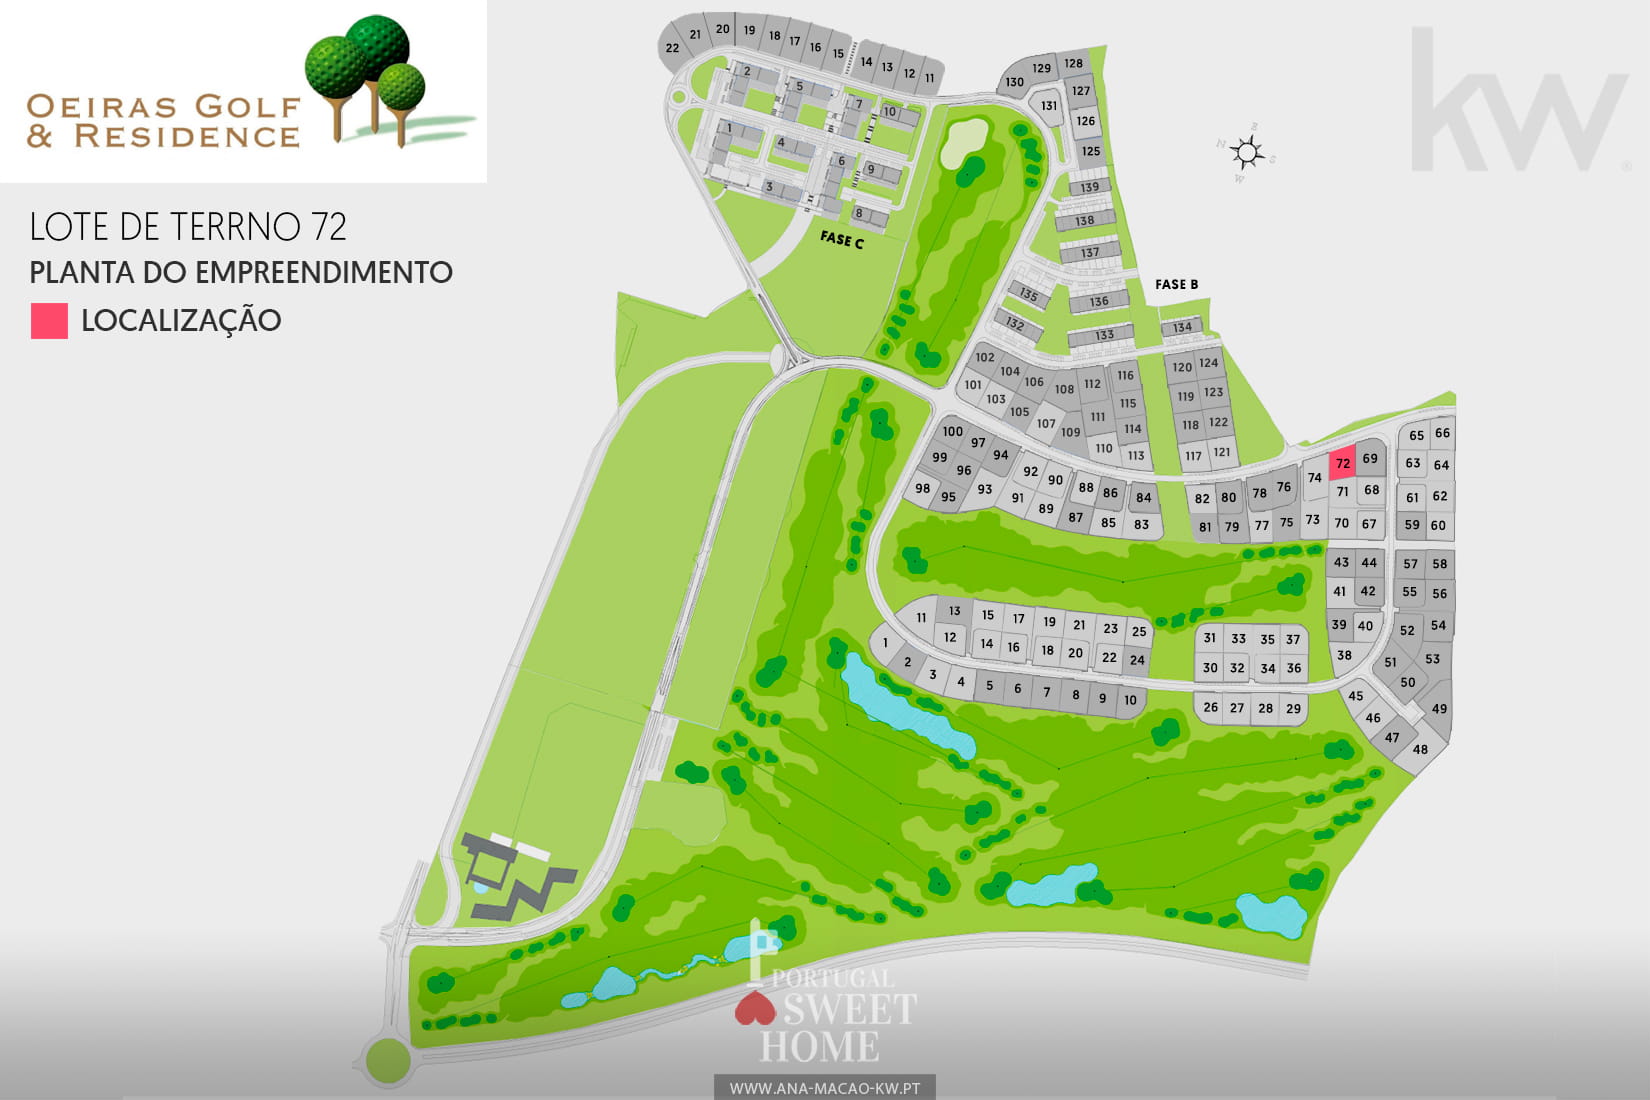 Location of Plot of Land at Oeiras Golf & Residence